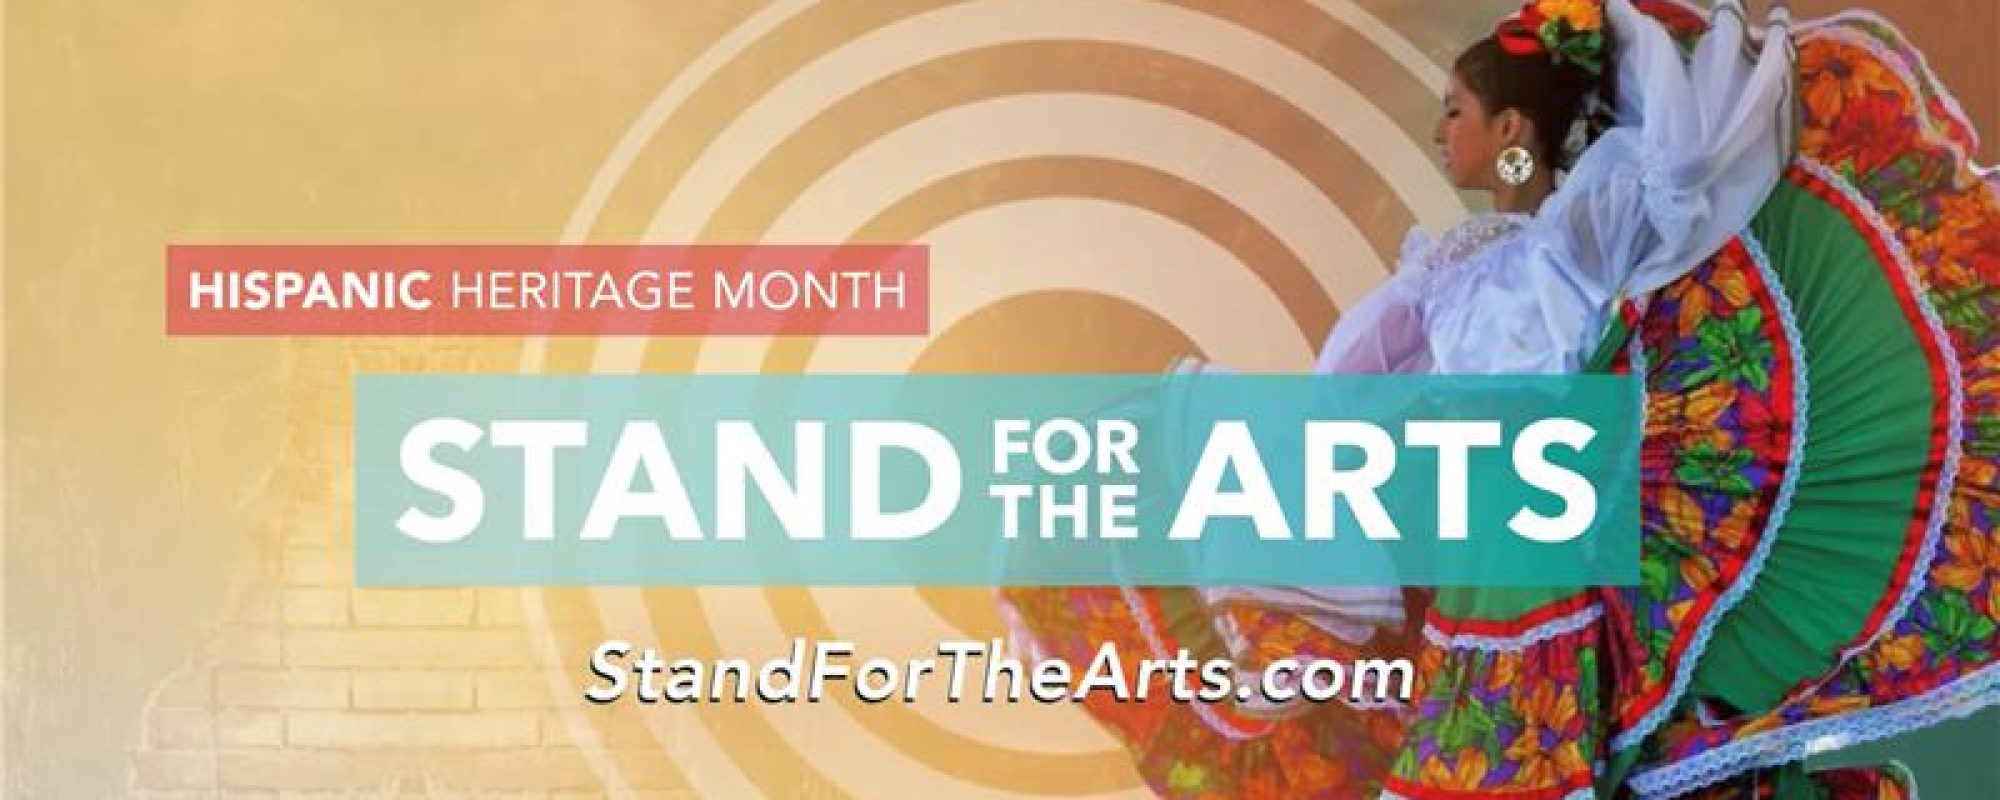 OVATION TV CELEBRATES NATIONAL HISPANIC HERITAGE MONTH WITH ON-AIR PUBLIC SERVICE ANNOUNCEMENTS HIGHLIGHTING THE NATIONAL HISPANIC FOUNDATION FOR THE ARTS AND BALLET HISPÁNICO